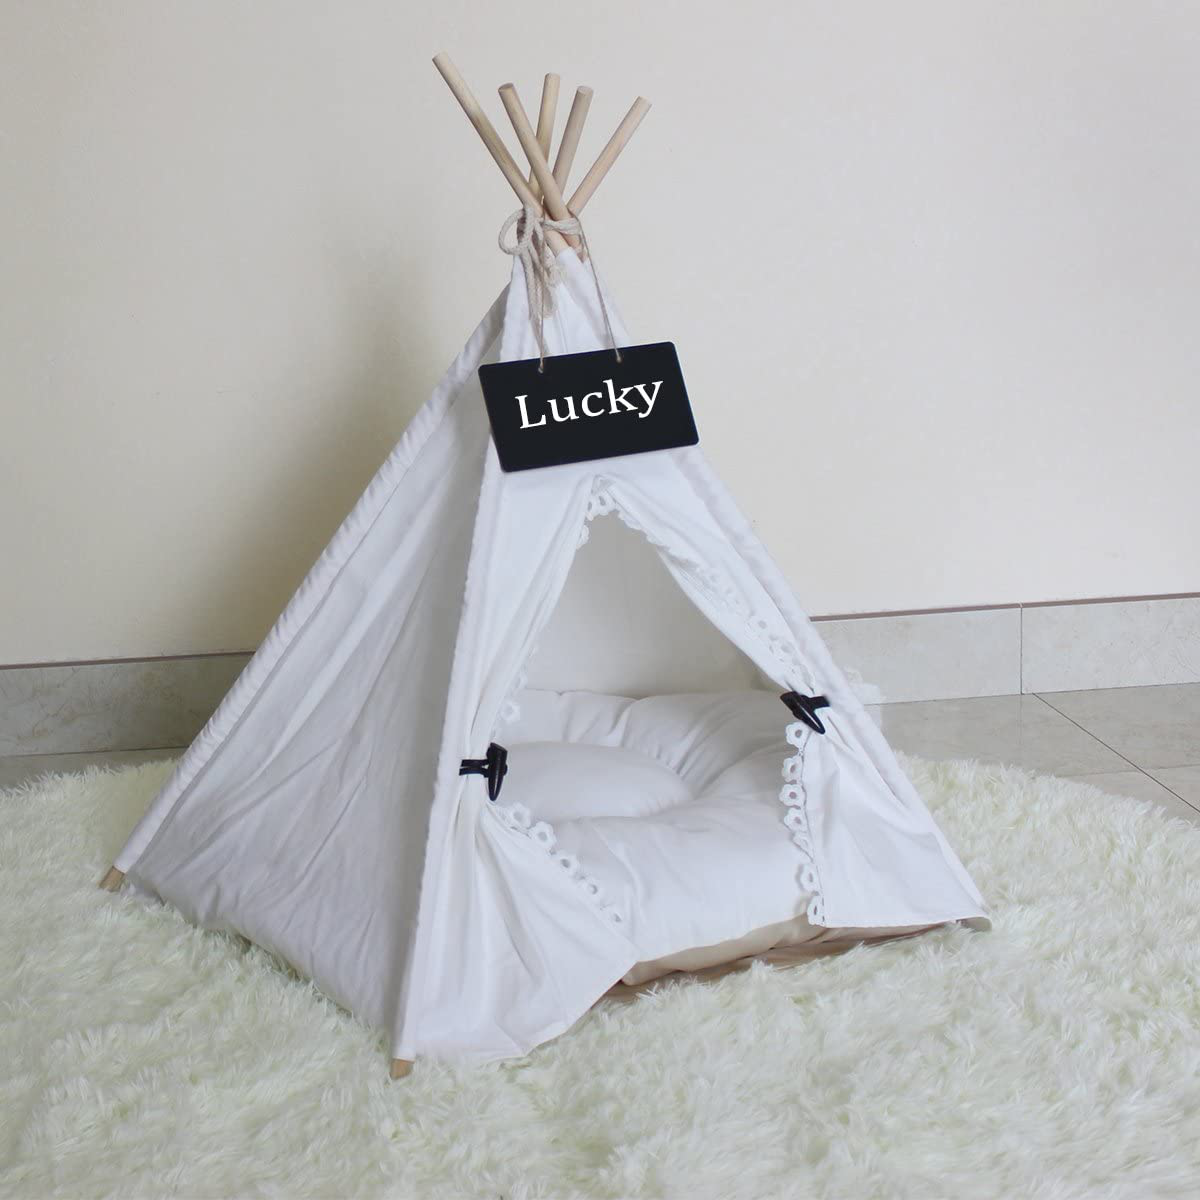 Penck Pet Teepee Dog & Cat Bed - Portable Dog Tents & Pet Houses with Thick Cushion & Blackboard, 24 Inch Tall, for Pets up to 15Lbs